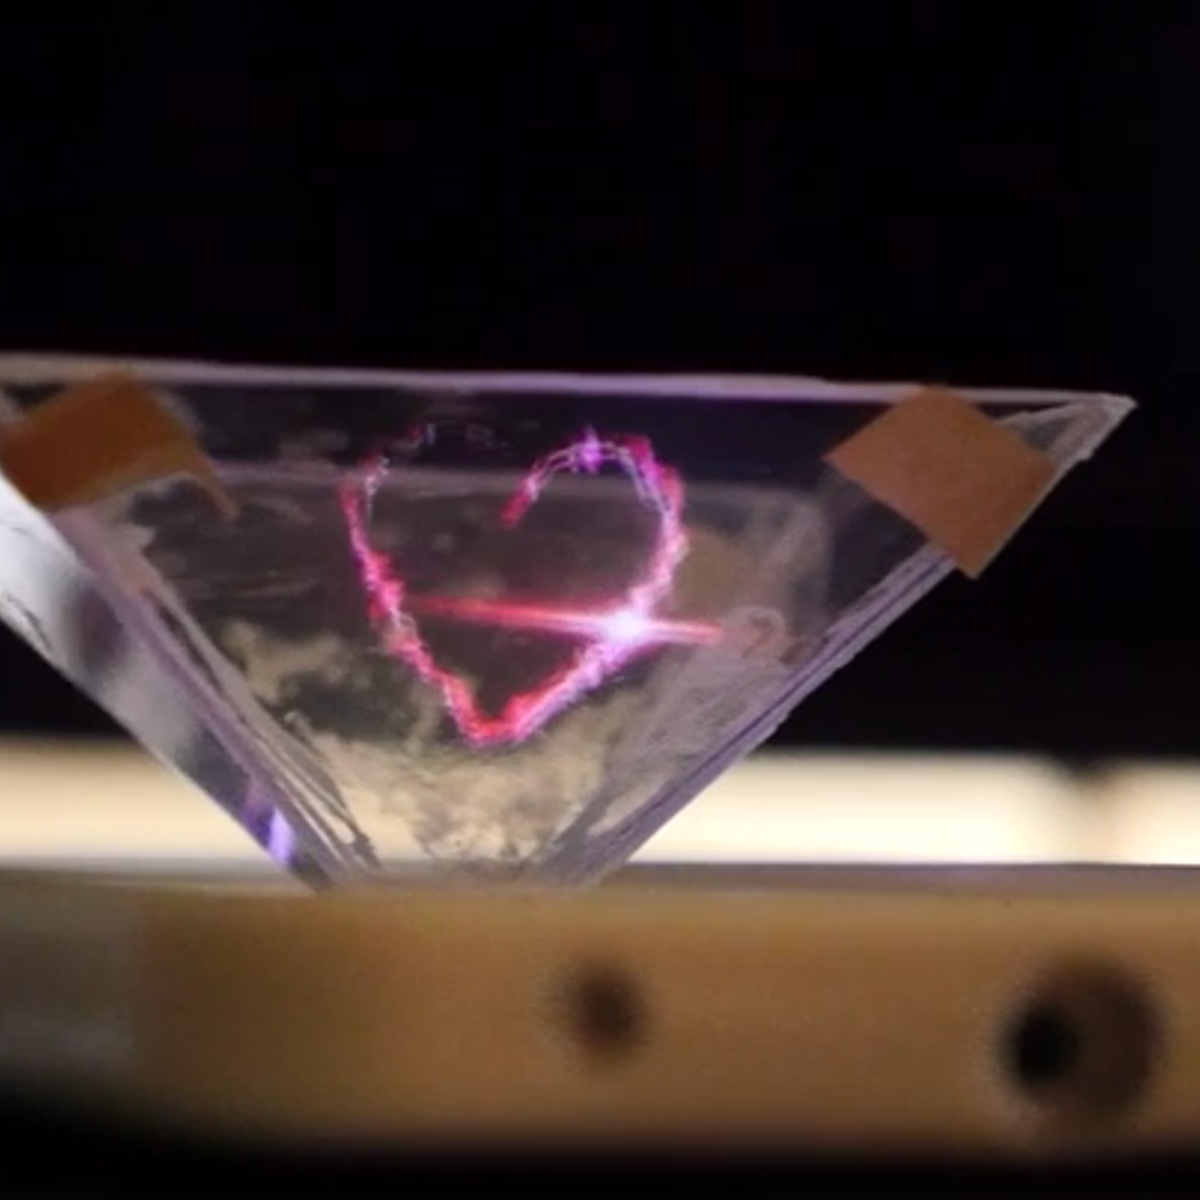 How to turn your phone into a 3D hologram projector